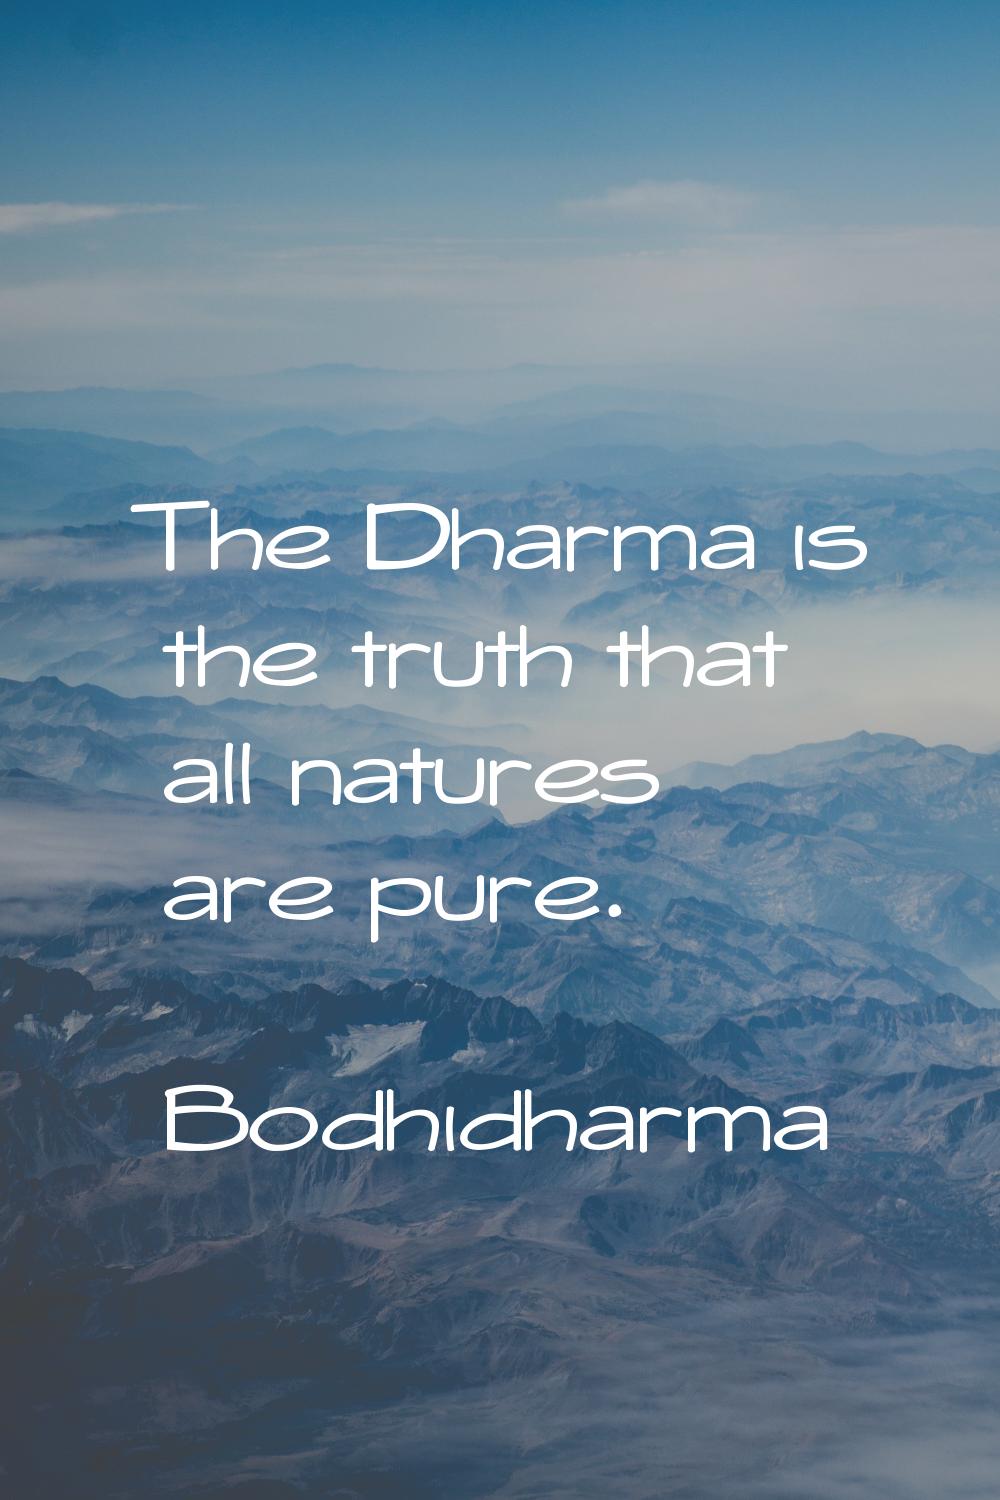 The Dharma is the truth that all natures are pure.